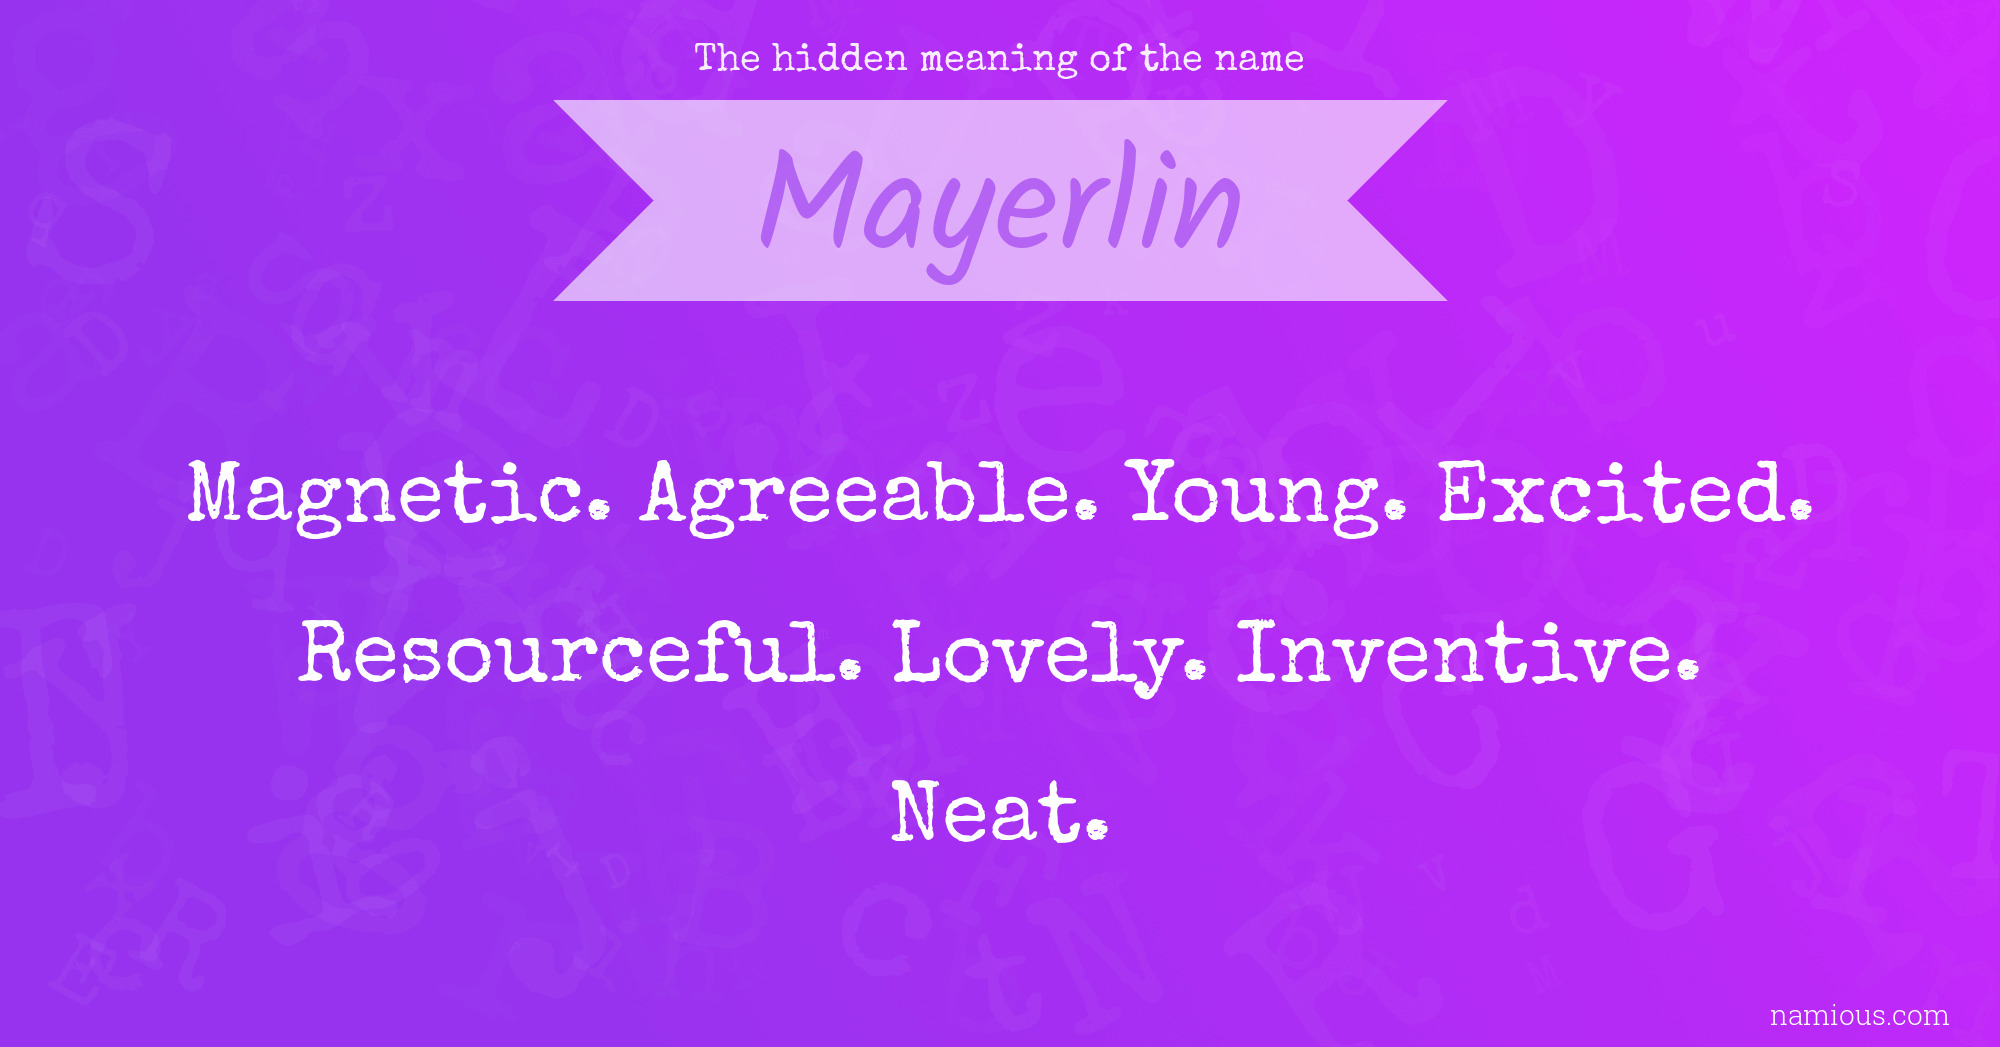 The hidden meaning of the name Mayerlin